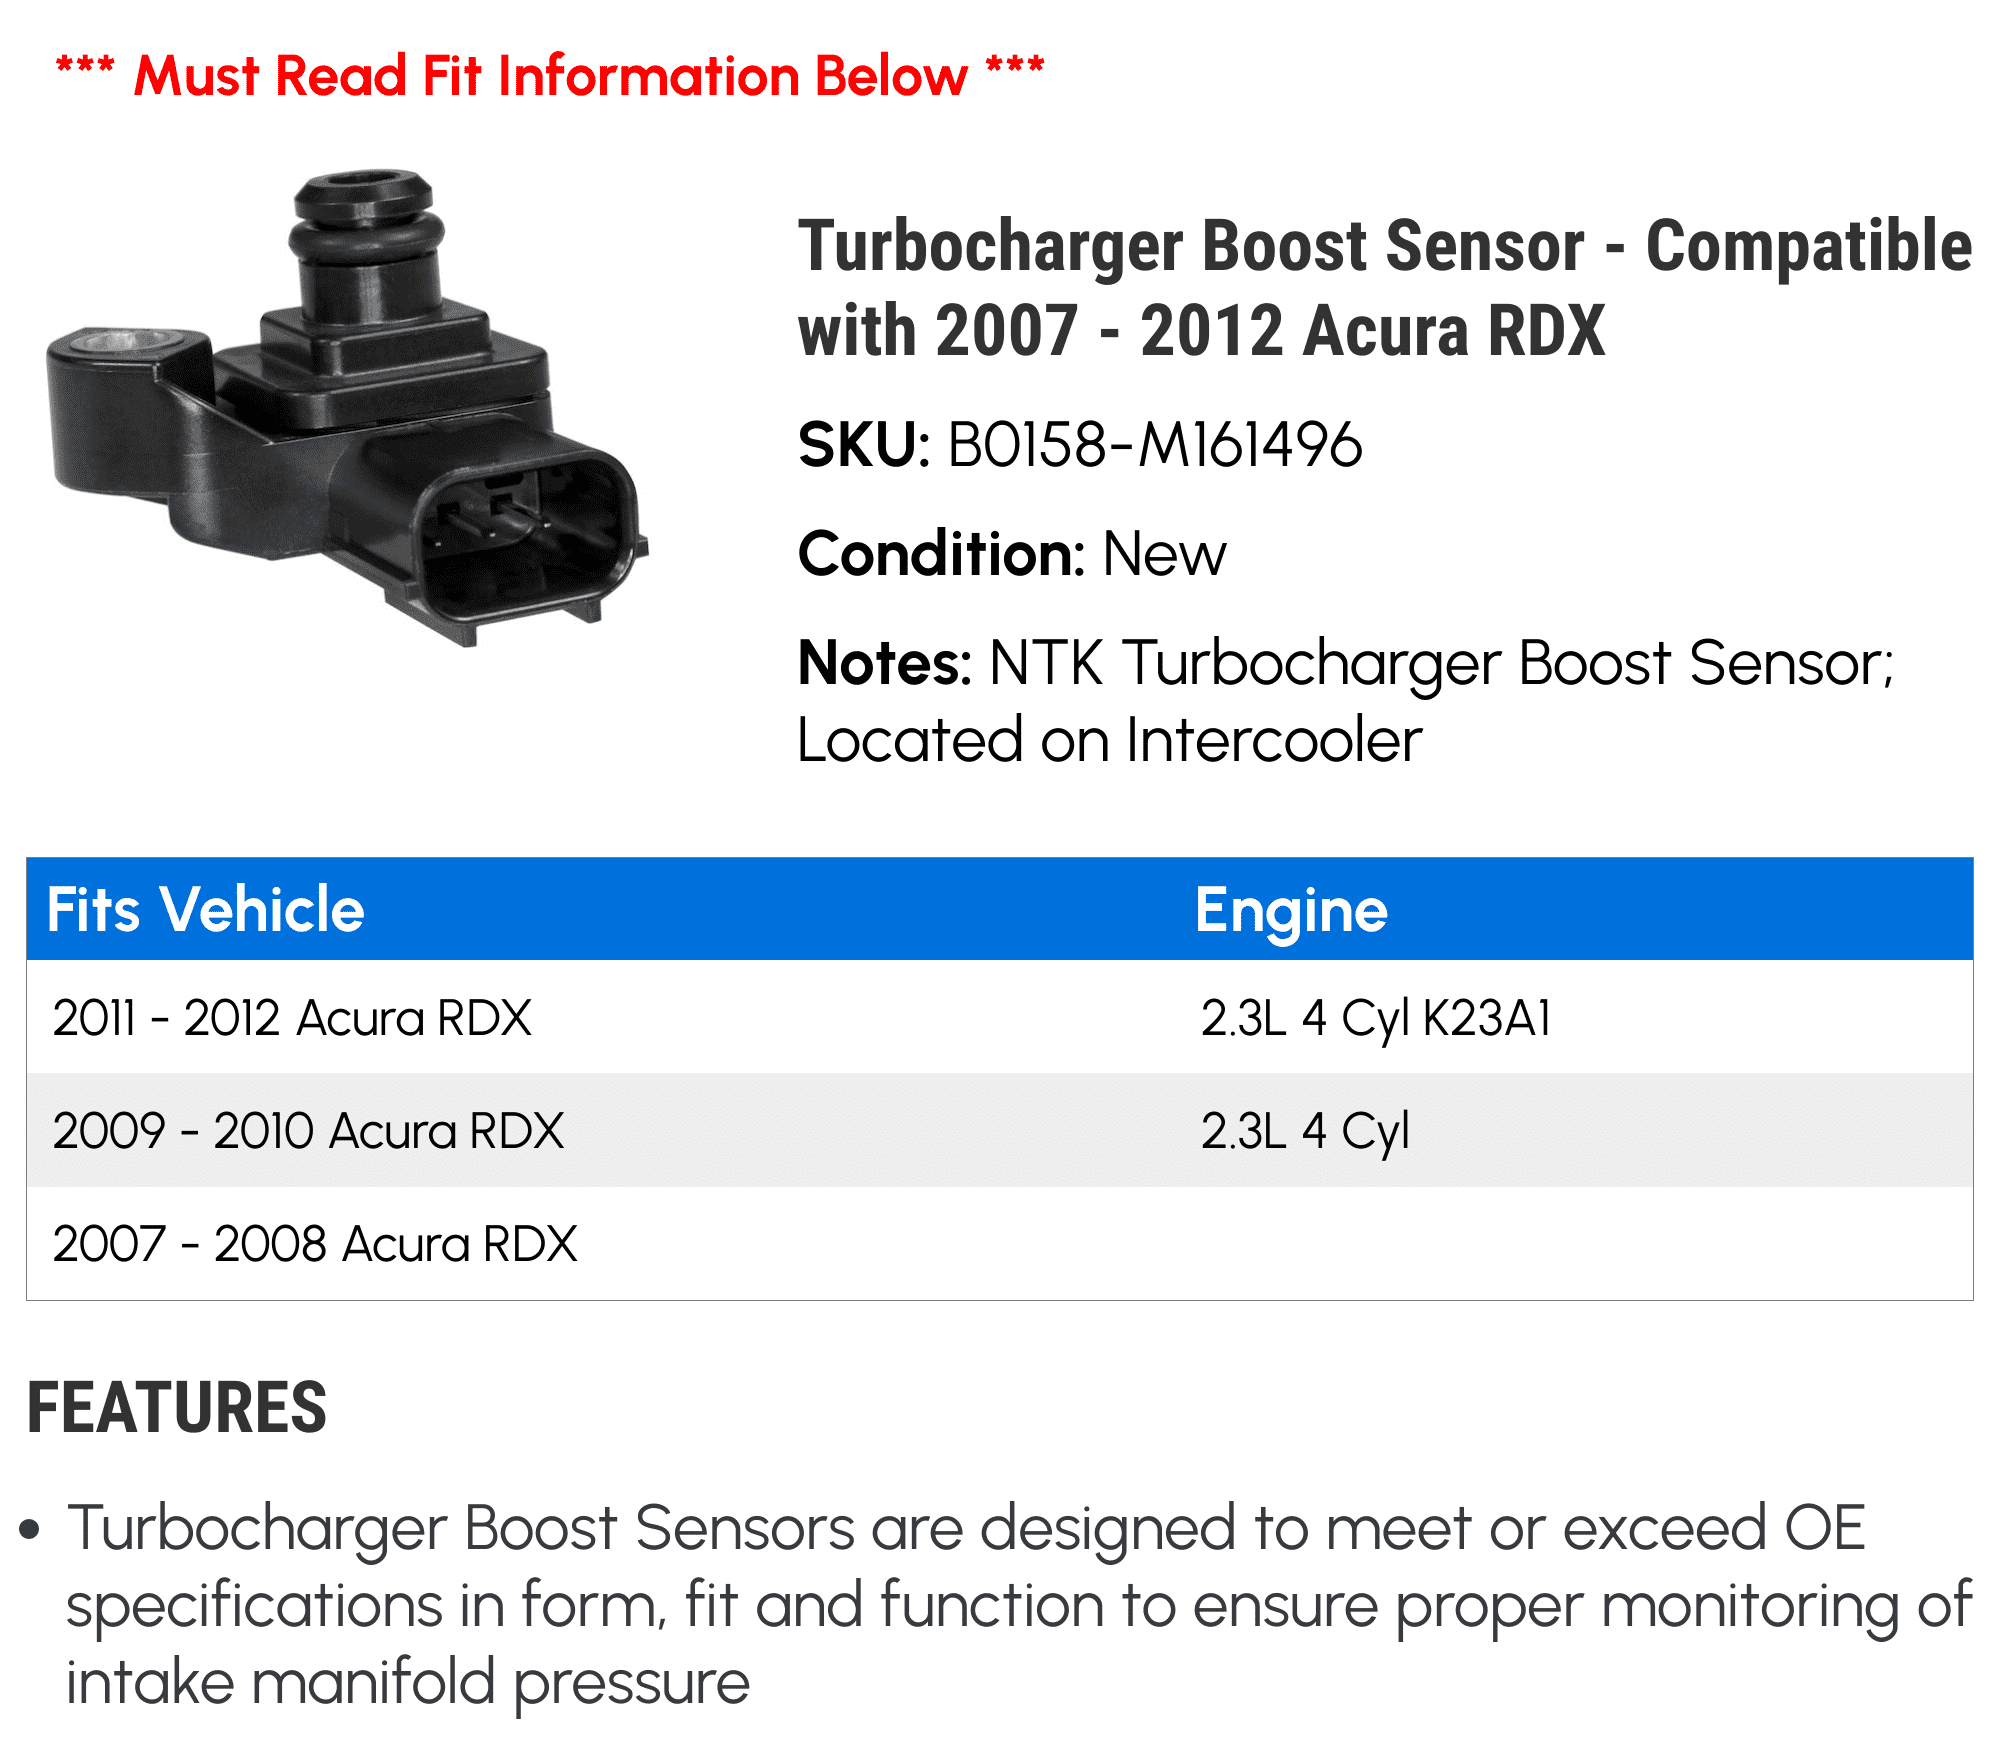 Replacement Turbocharger Boost Sensor fits Acura - 3